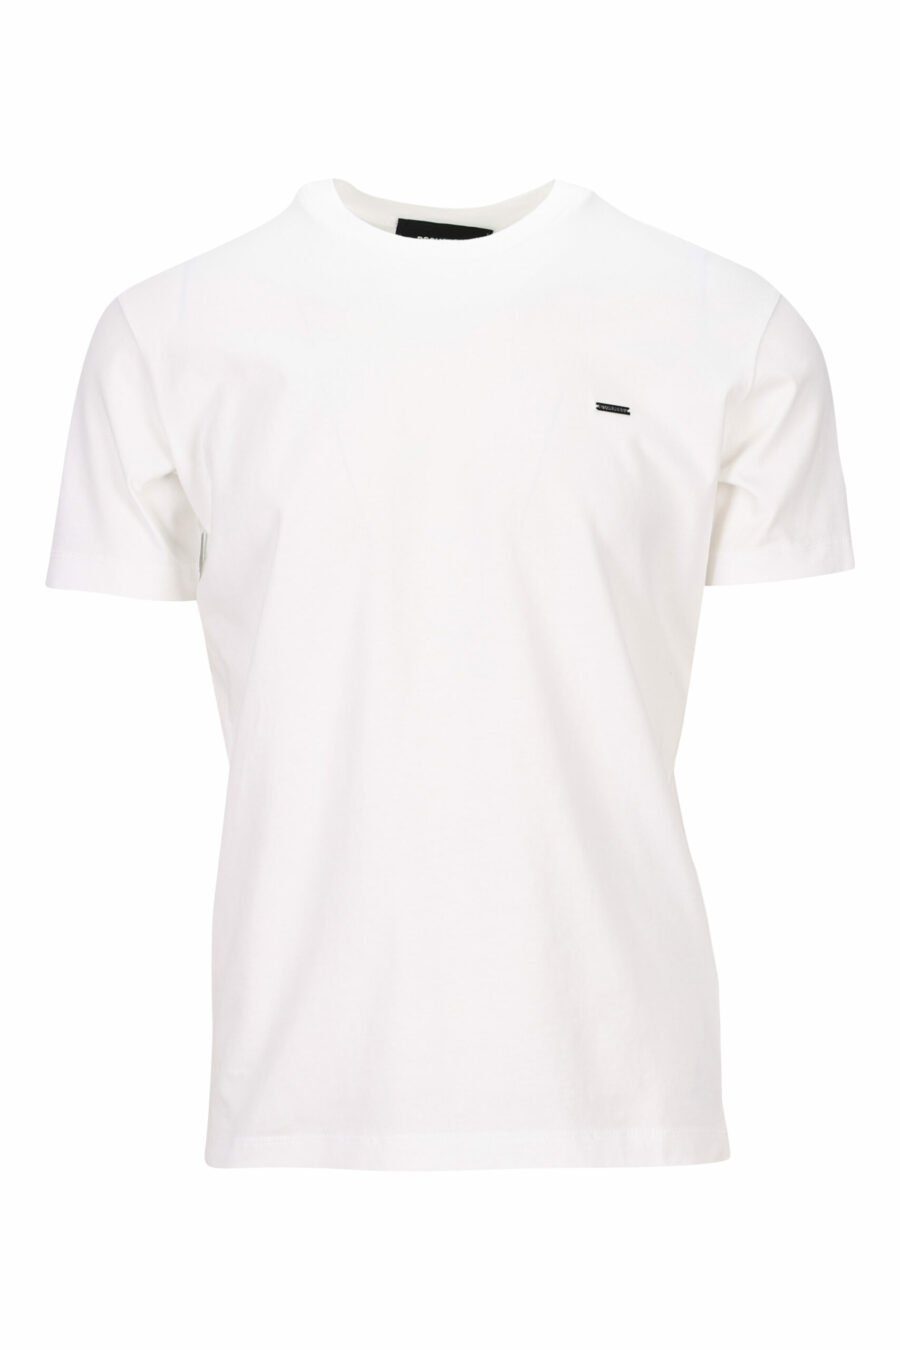 White T-shirt with logo on small plate - 8054148404369 scaled